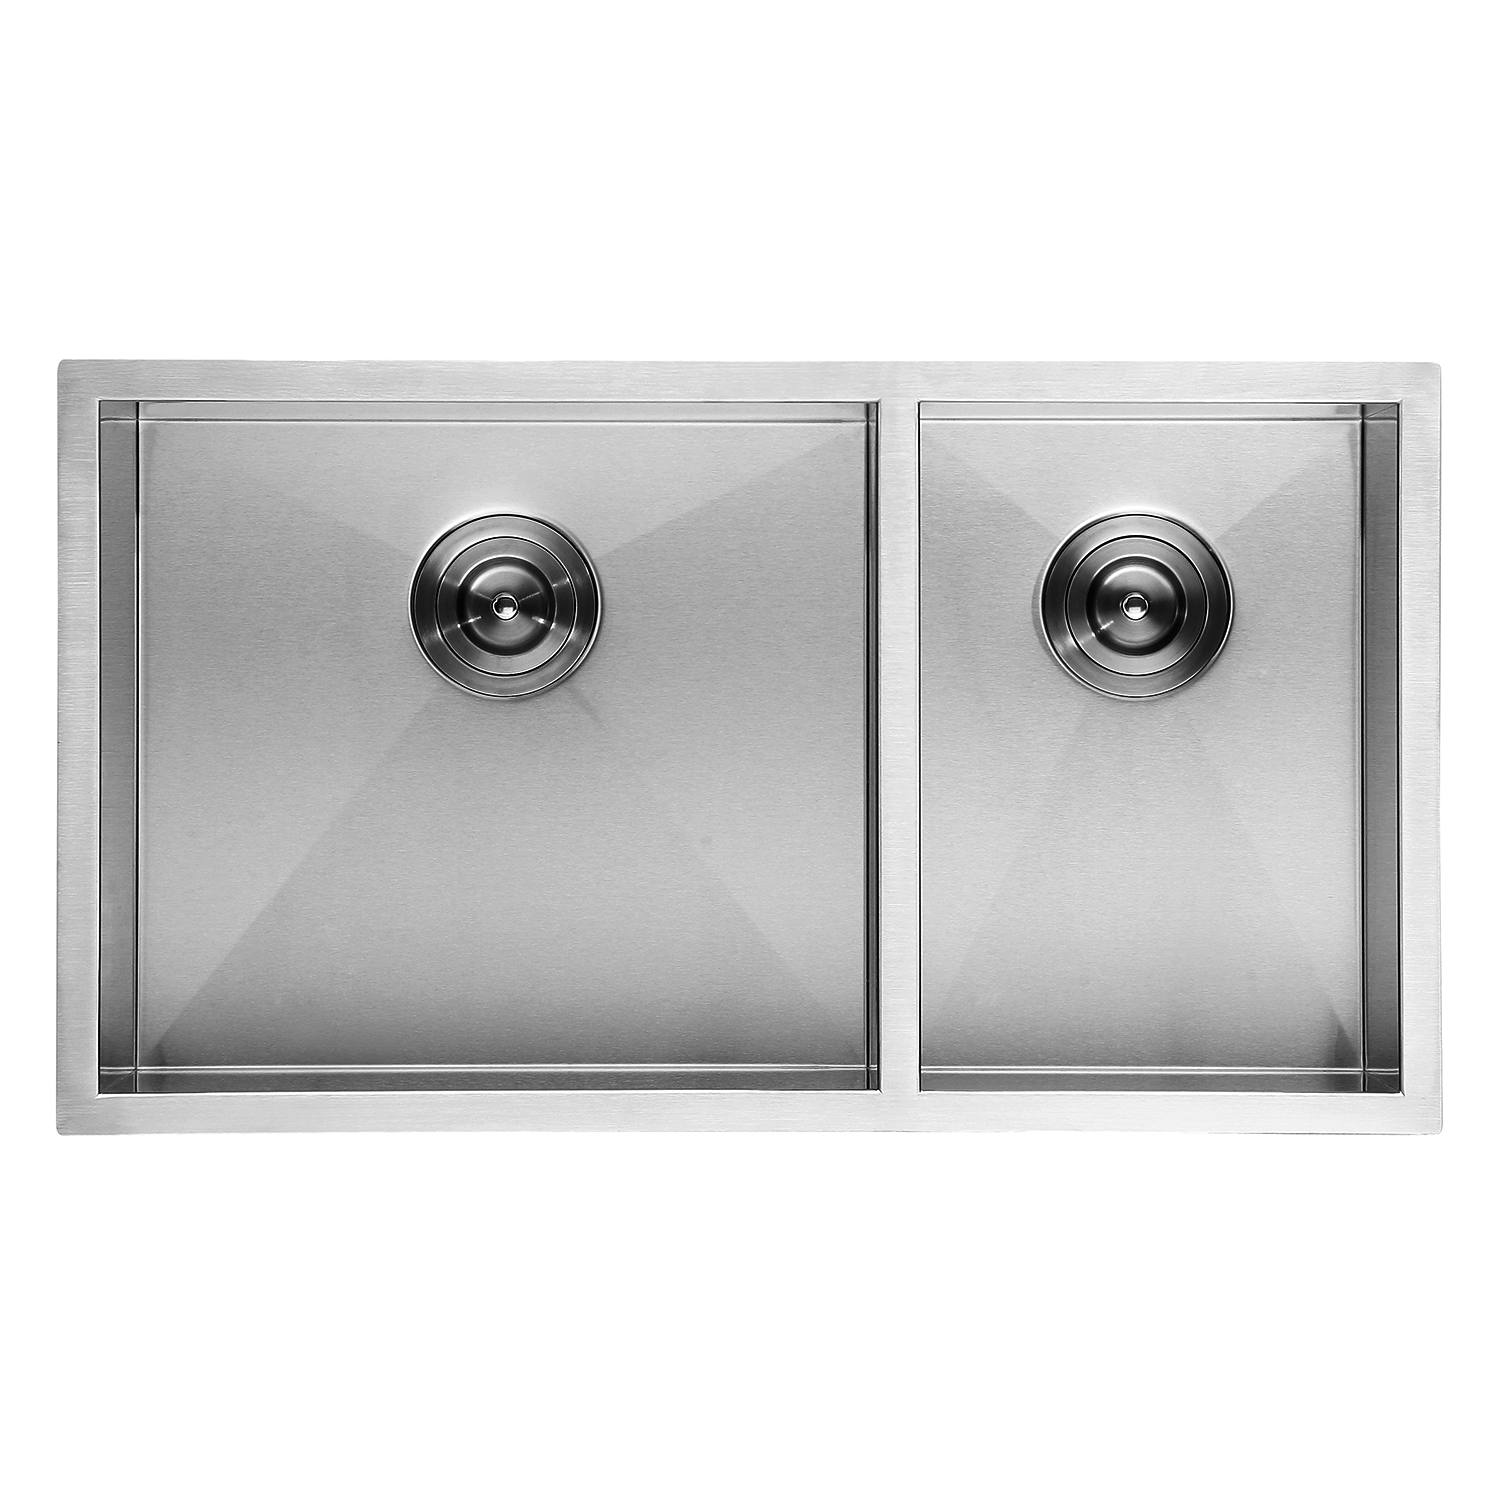 DAX Handmade 60/40 Square Double Bowl Undermount Kitchen Sink, 18 Gauge Stainless Steel, Brushed Finish, 33 x 20 x 10 Inches (KA-SQ-3320)